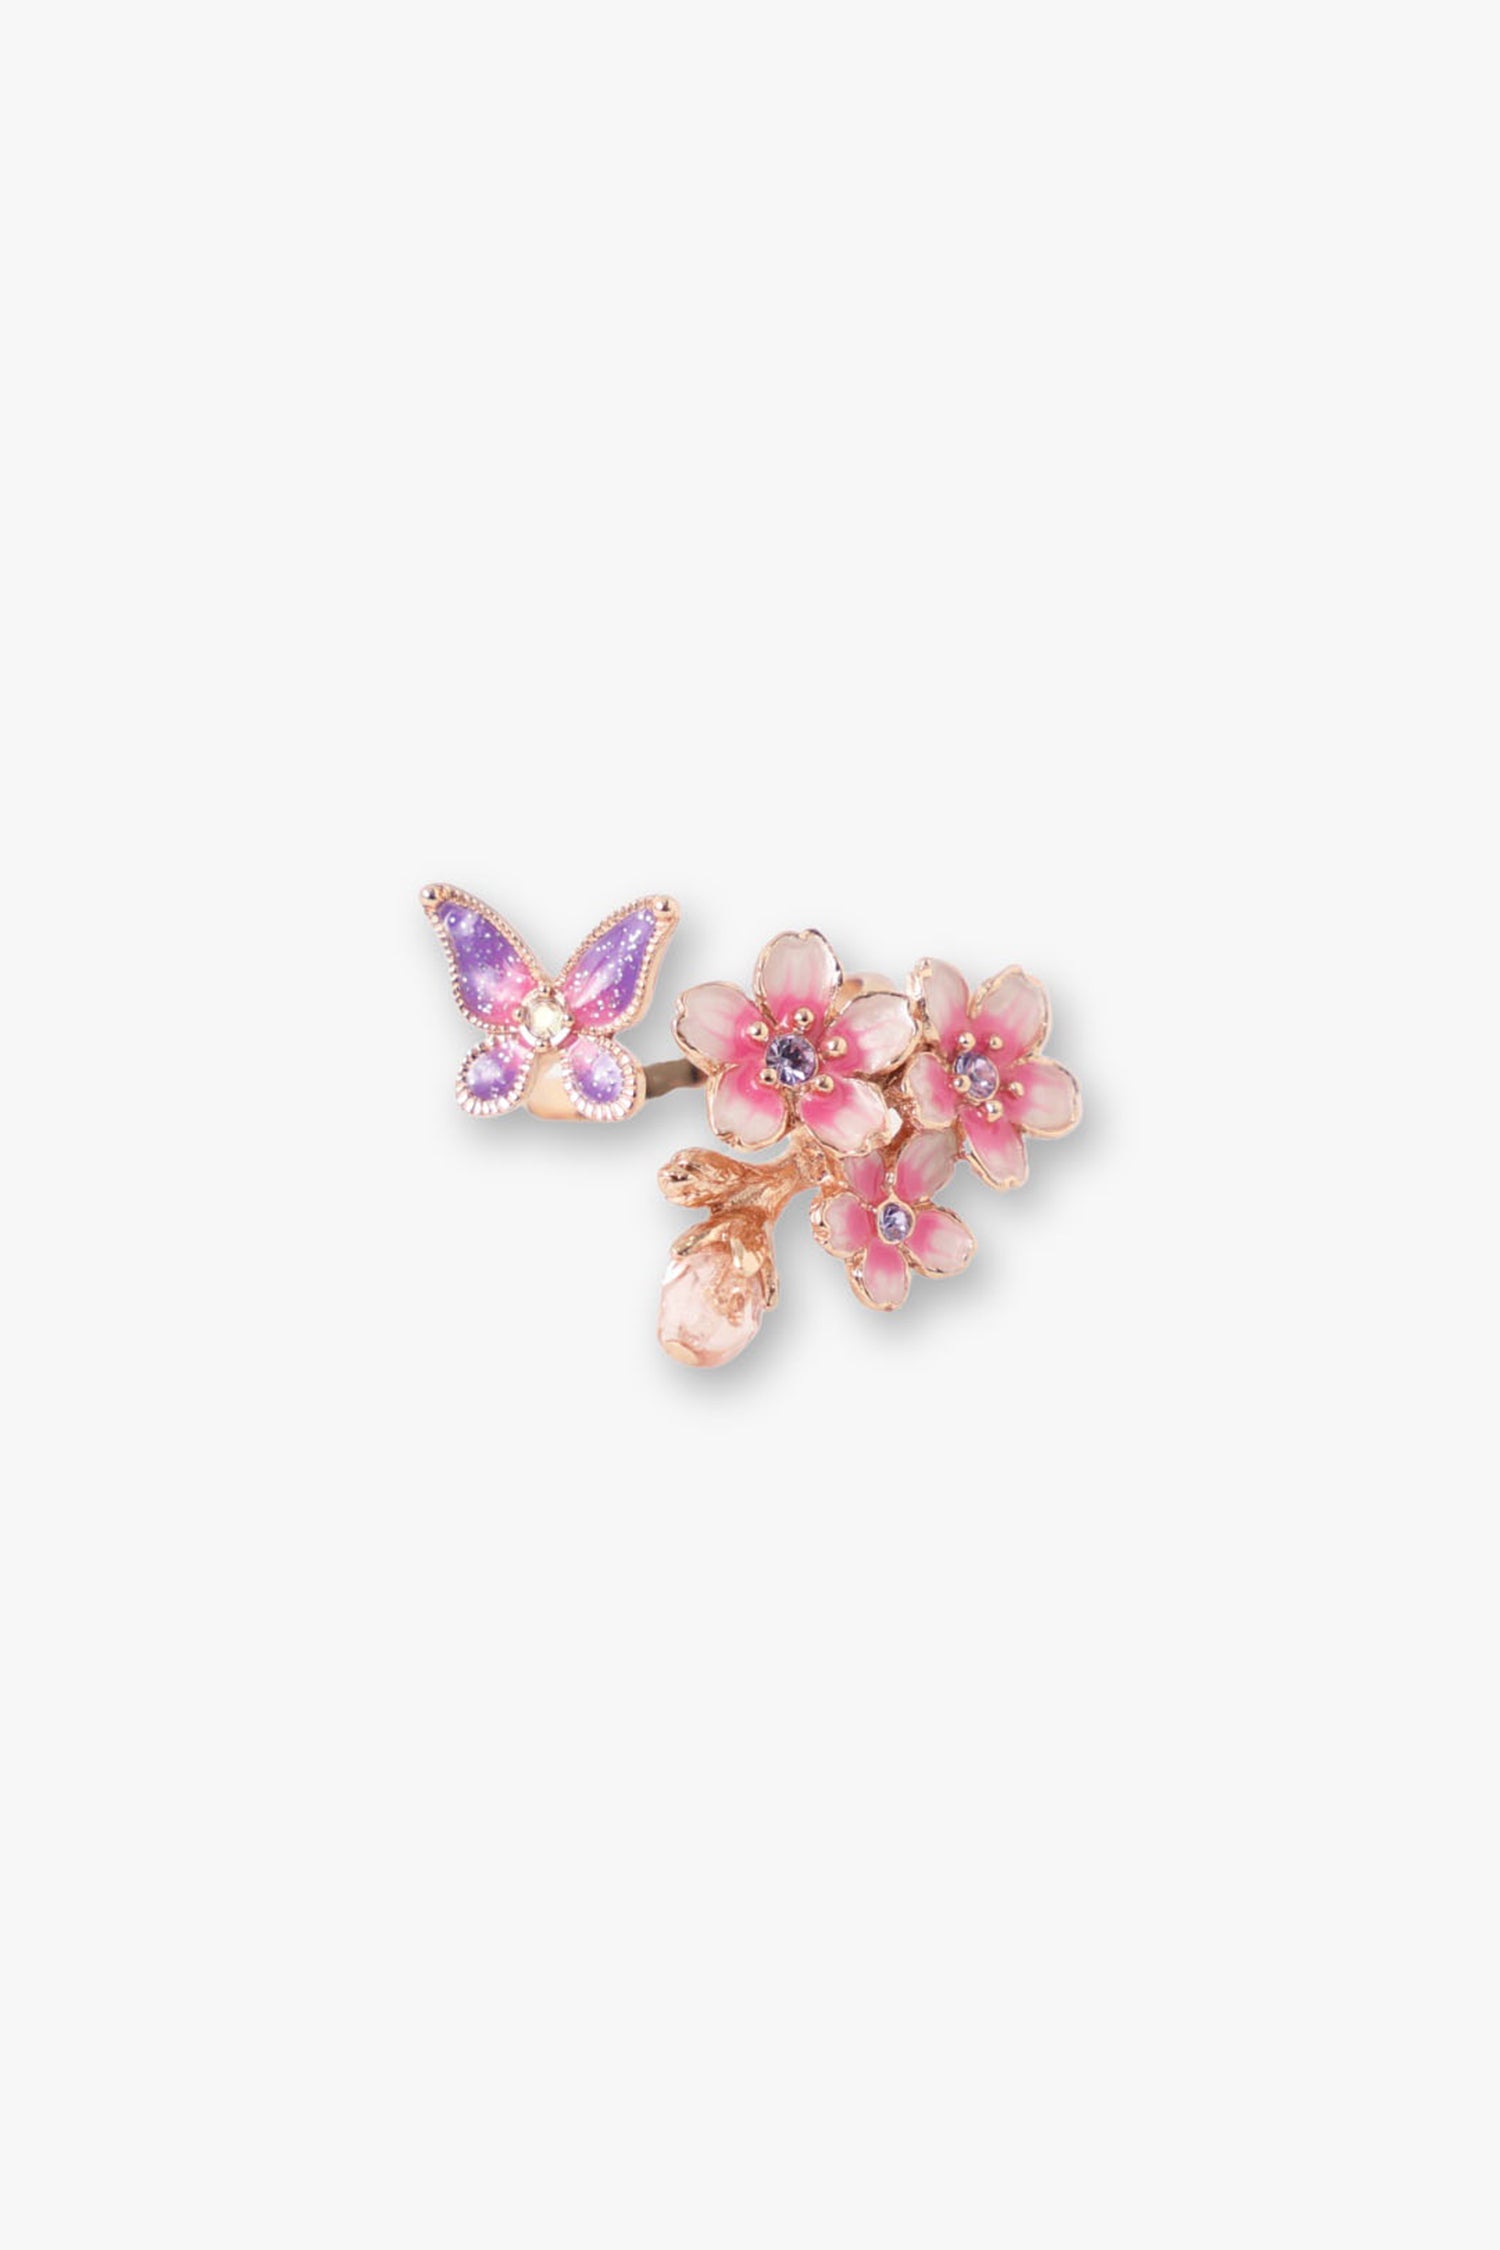 Butterfly Cherry Blossom Ring, Metal Pink and gold color plating, synthetic resin, and glass